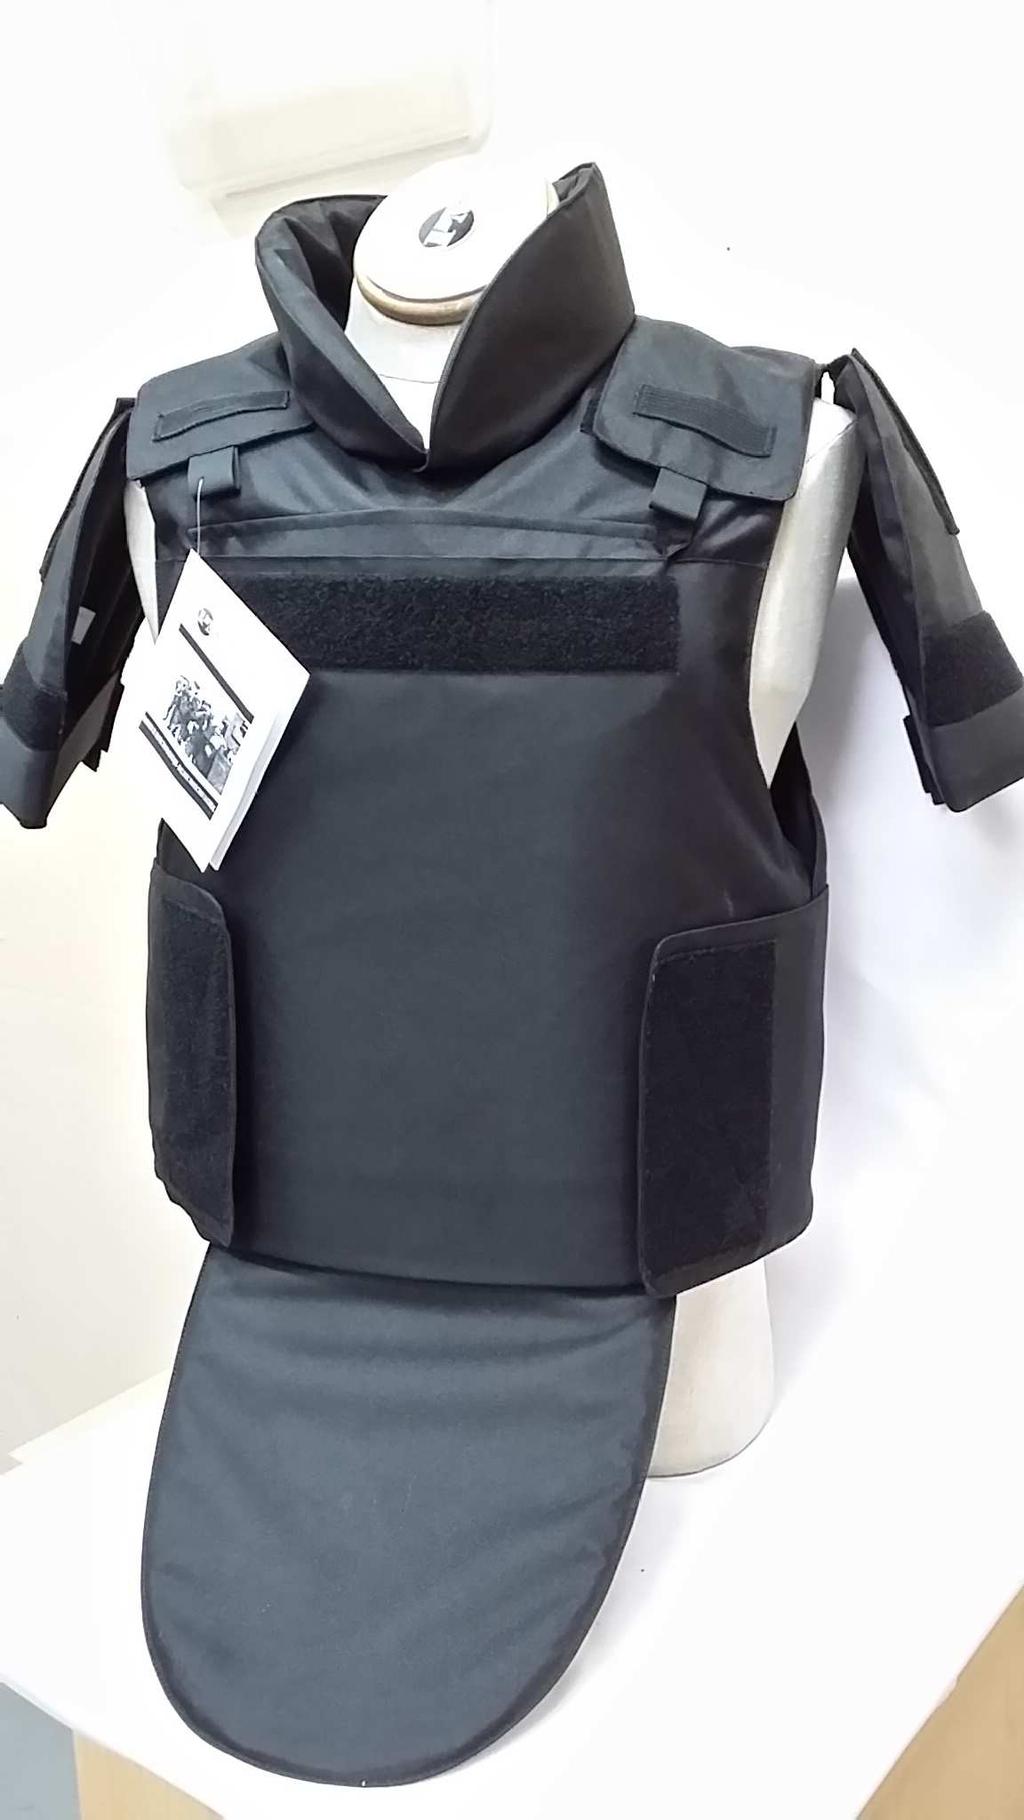 M/ BODY ARMOUR VESTS NIJ PROTECTION: PROTECTION: IIIA-0101,06 357 SIG FMJ FN 125gr,44 Magnum SJHP 240gr FRONT VIEW MATERIAL Tactical 8004V3 Bodyarmour Oxford 600 Denier *Soft panels with